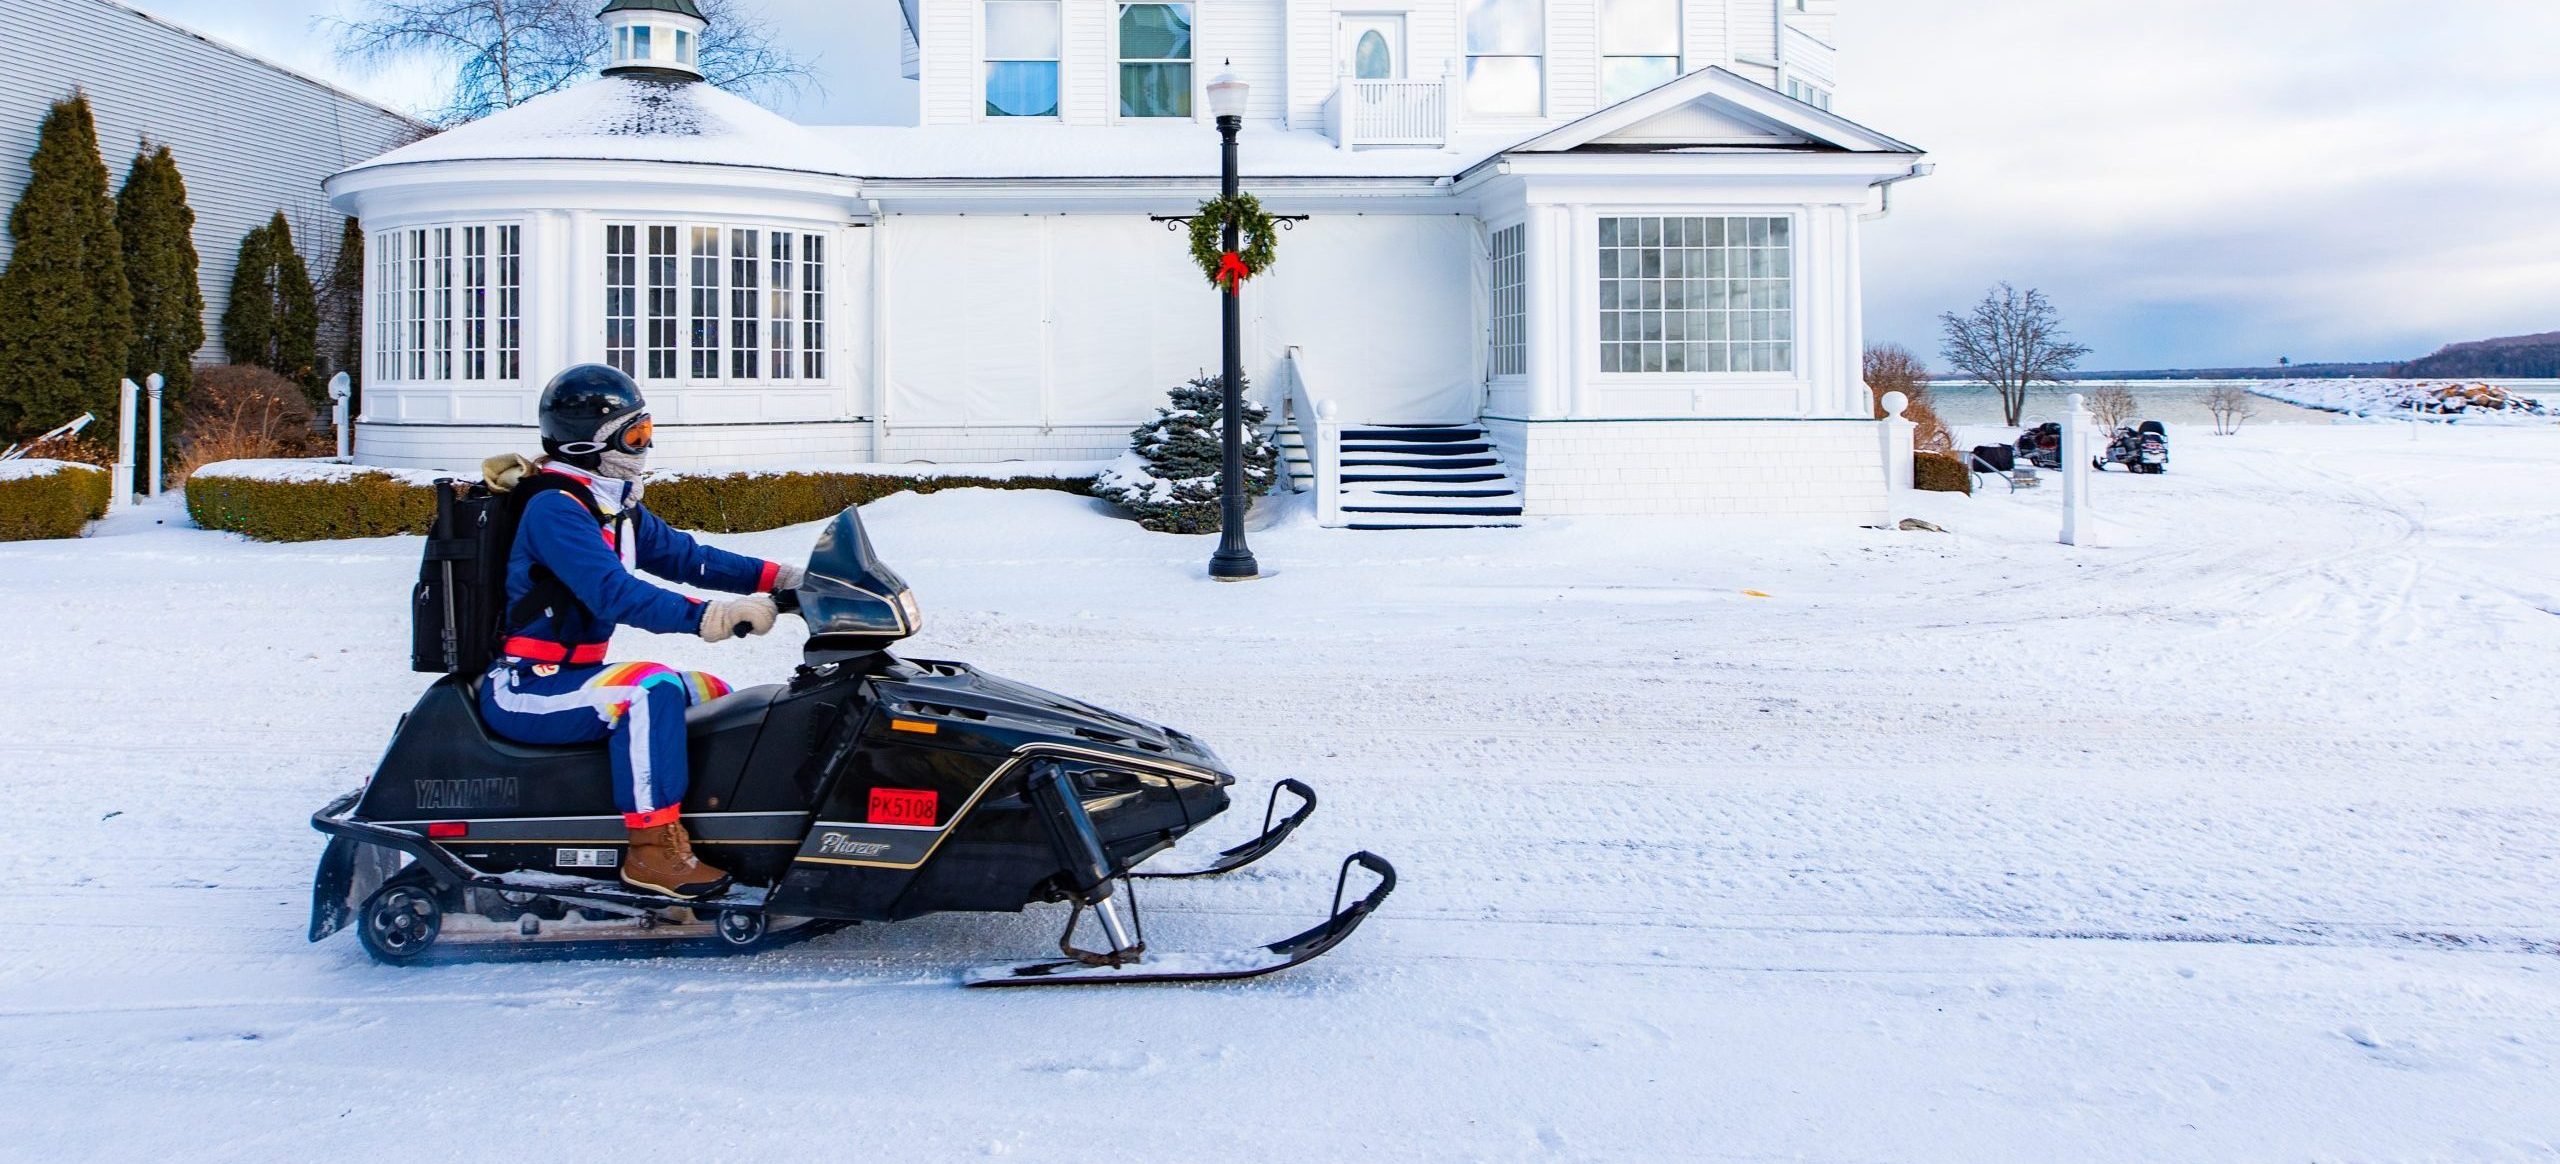 A person rides a snowmobile past a waterfront building on Michigan’s Mackinac Island